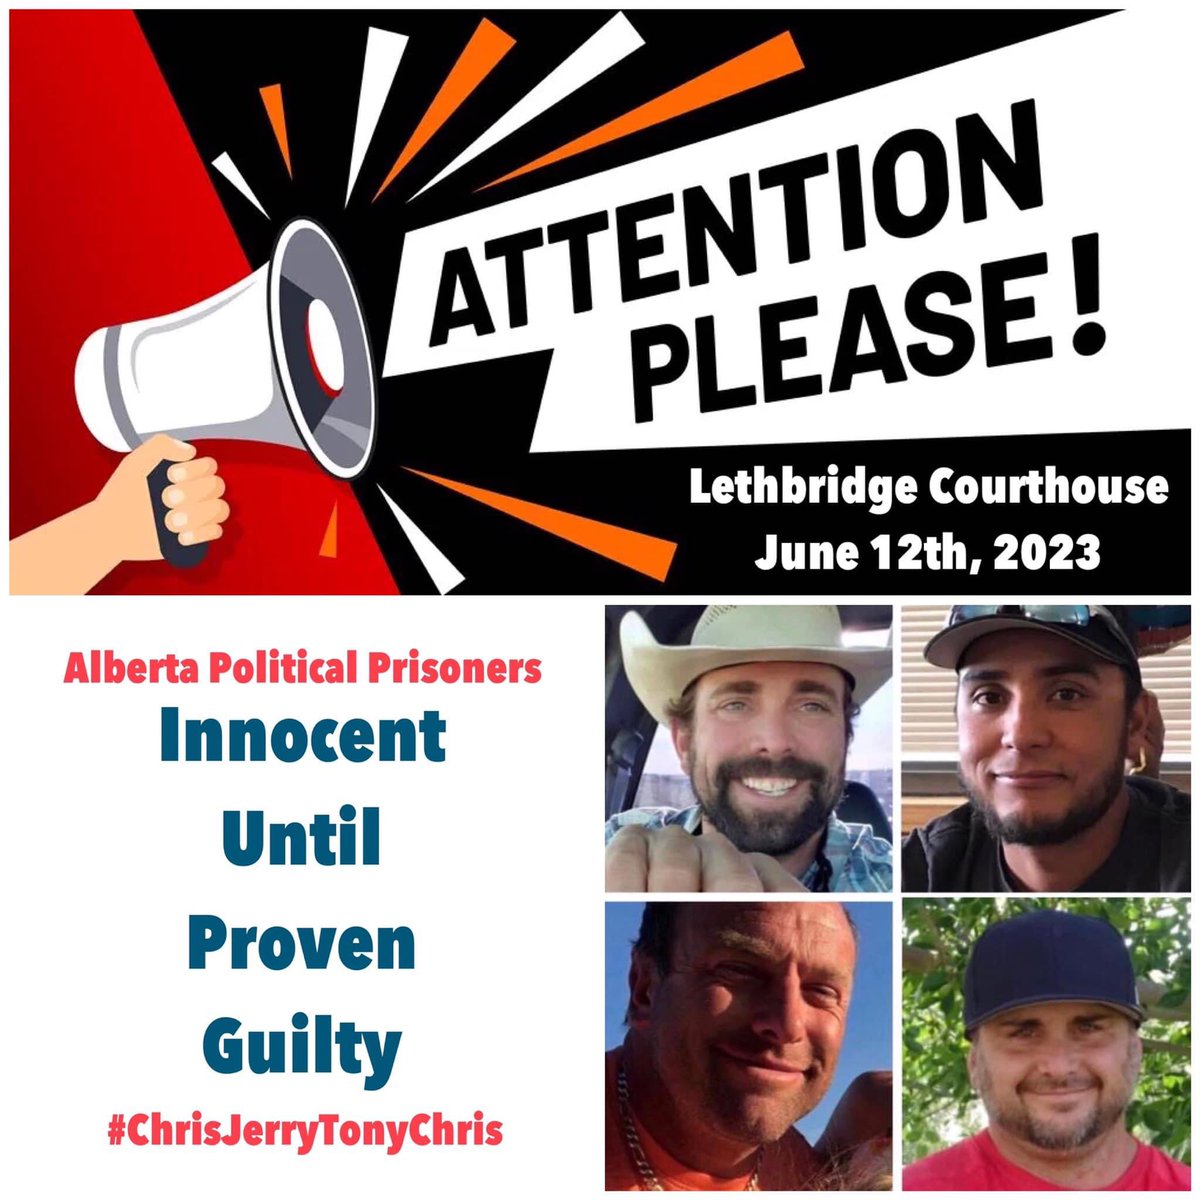 @PierrePoilievre Hmm…so politician can interfere with jails🤔
How about you help the 4 men from #Coutts who have been held without bail & denied due process?